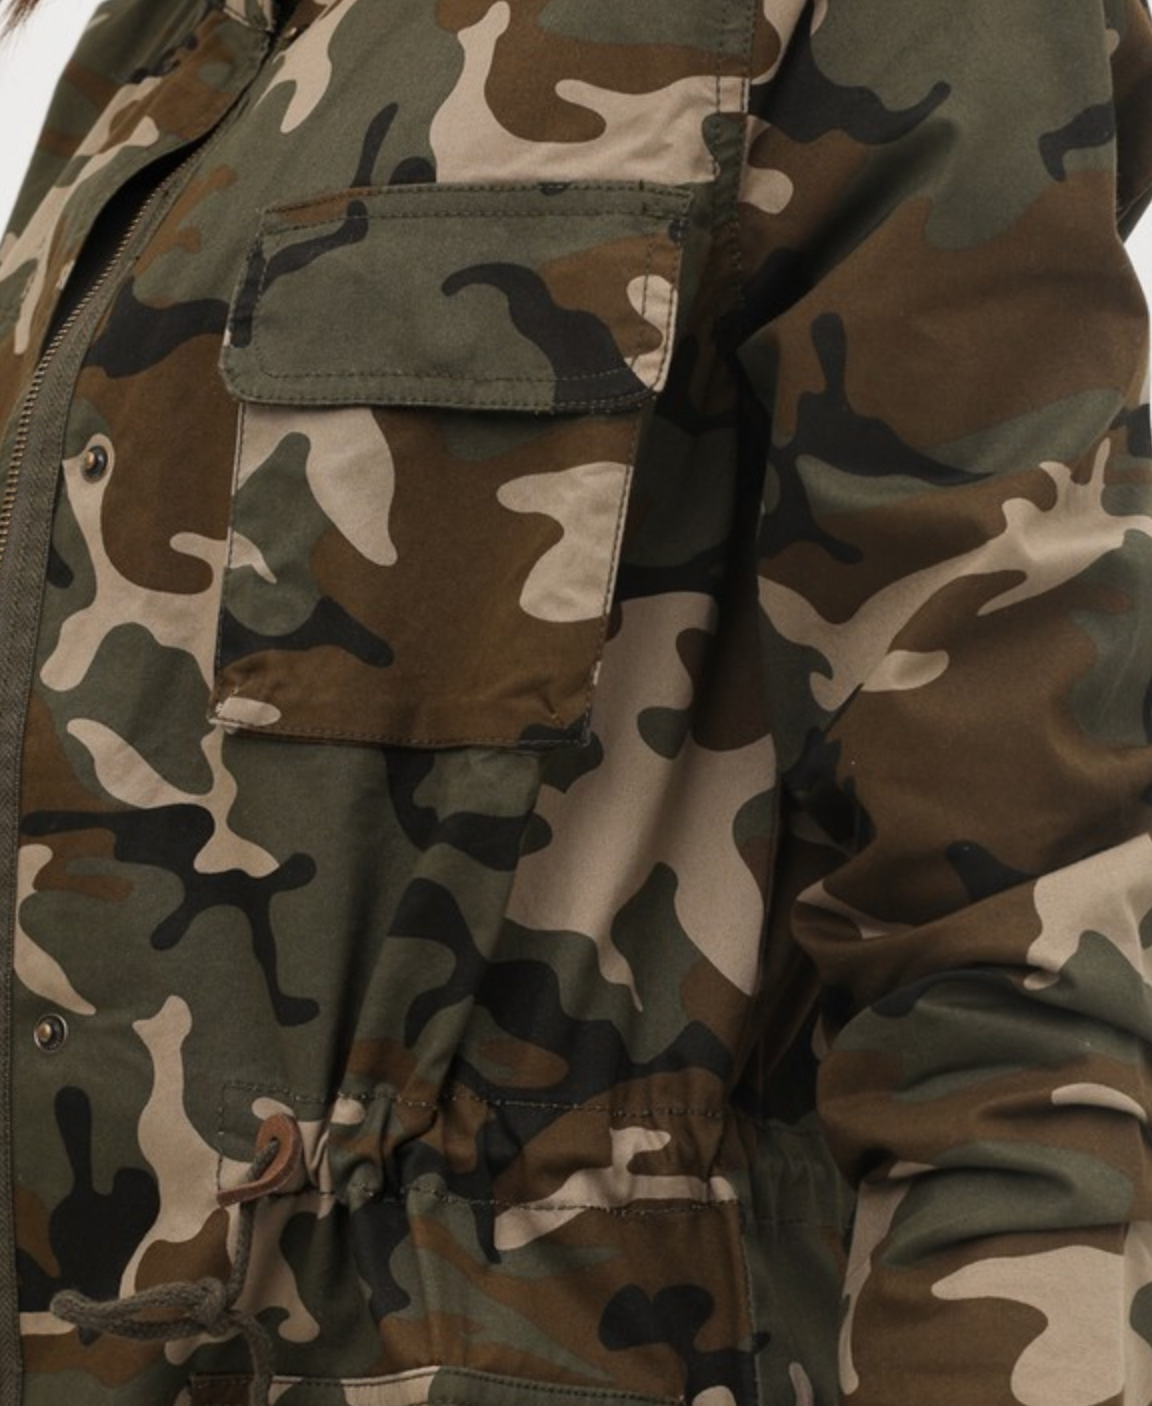 Camo Print Anorak Jacket - S.O.S Save Our Soles